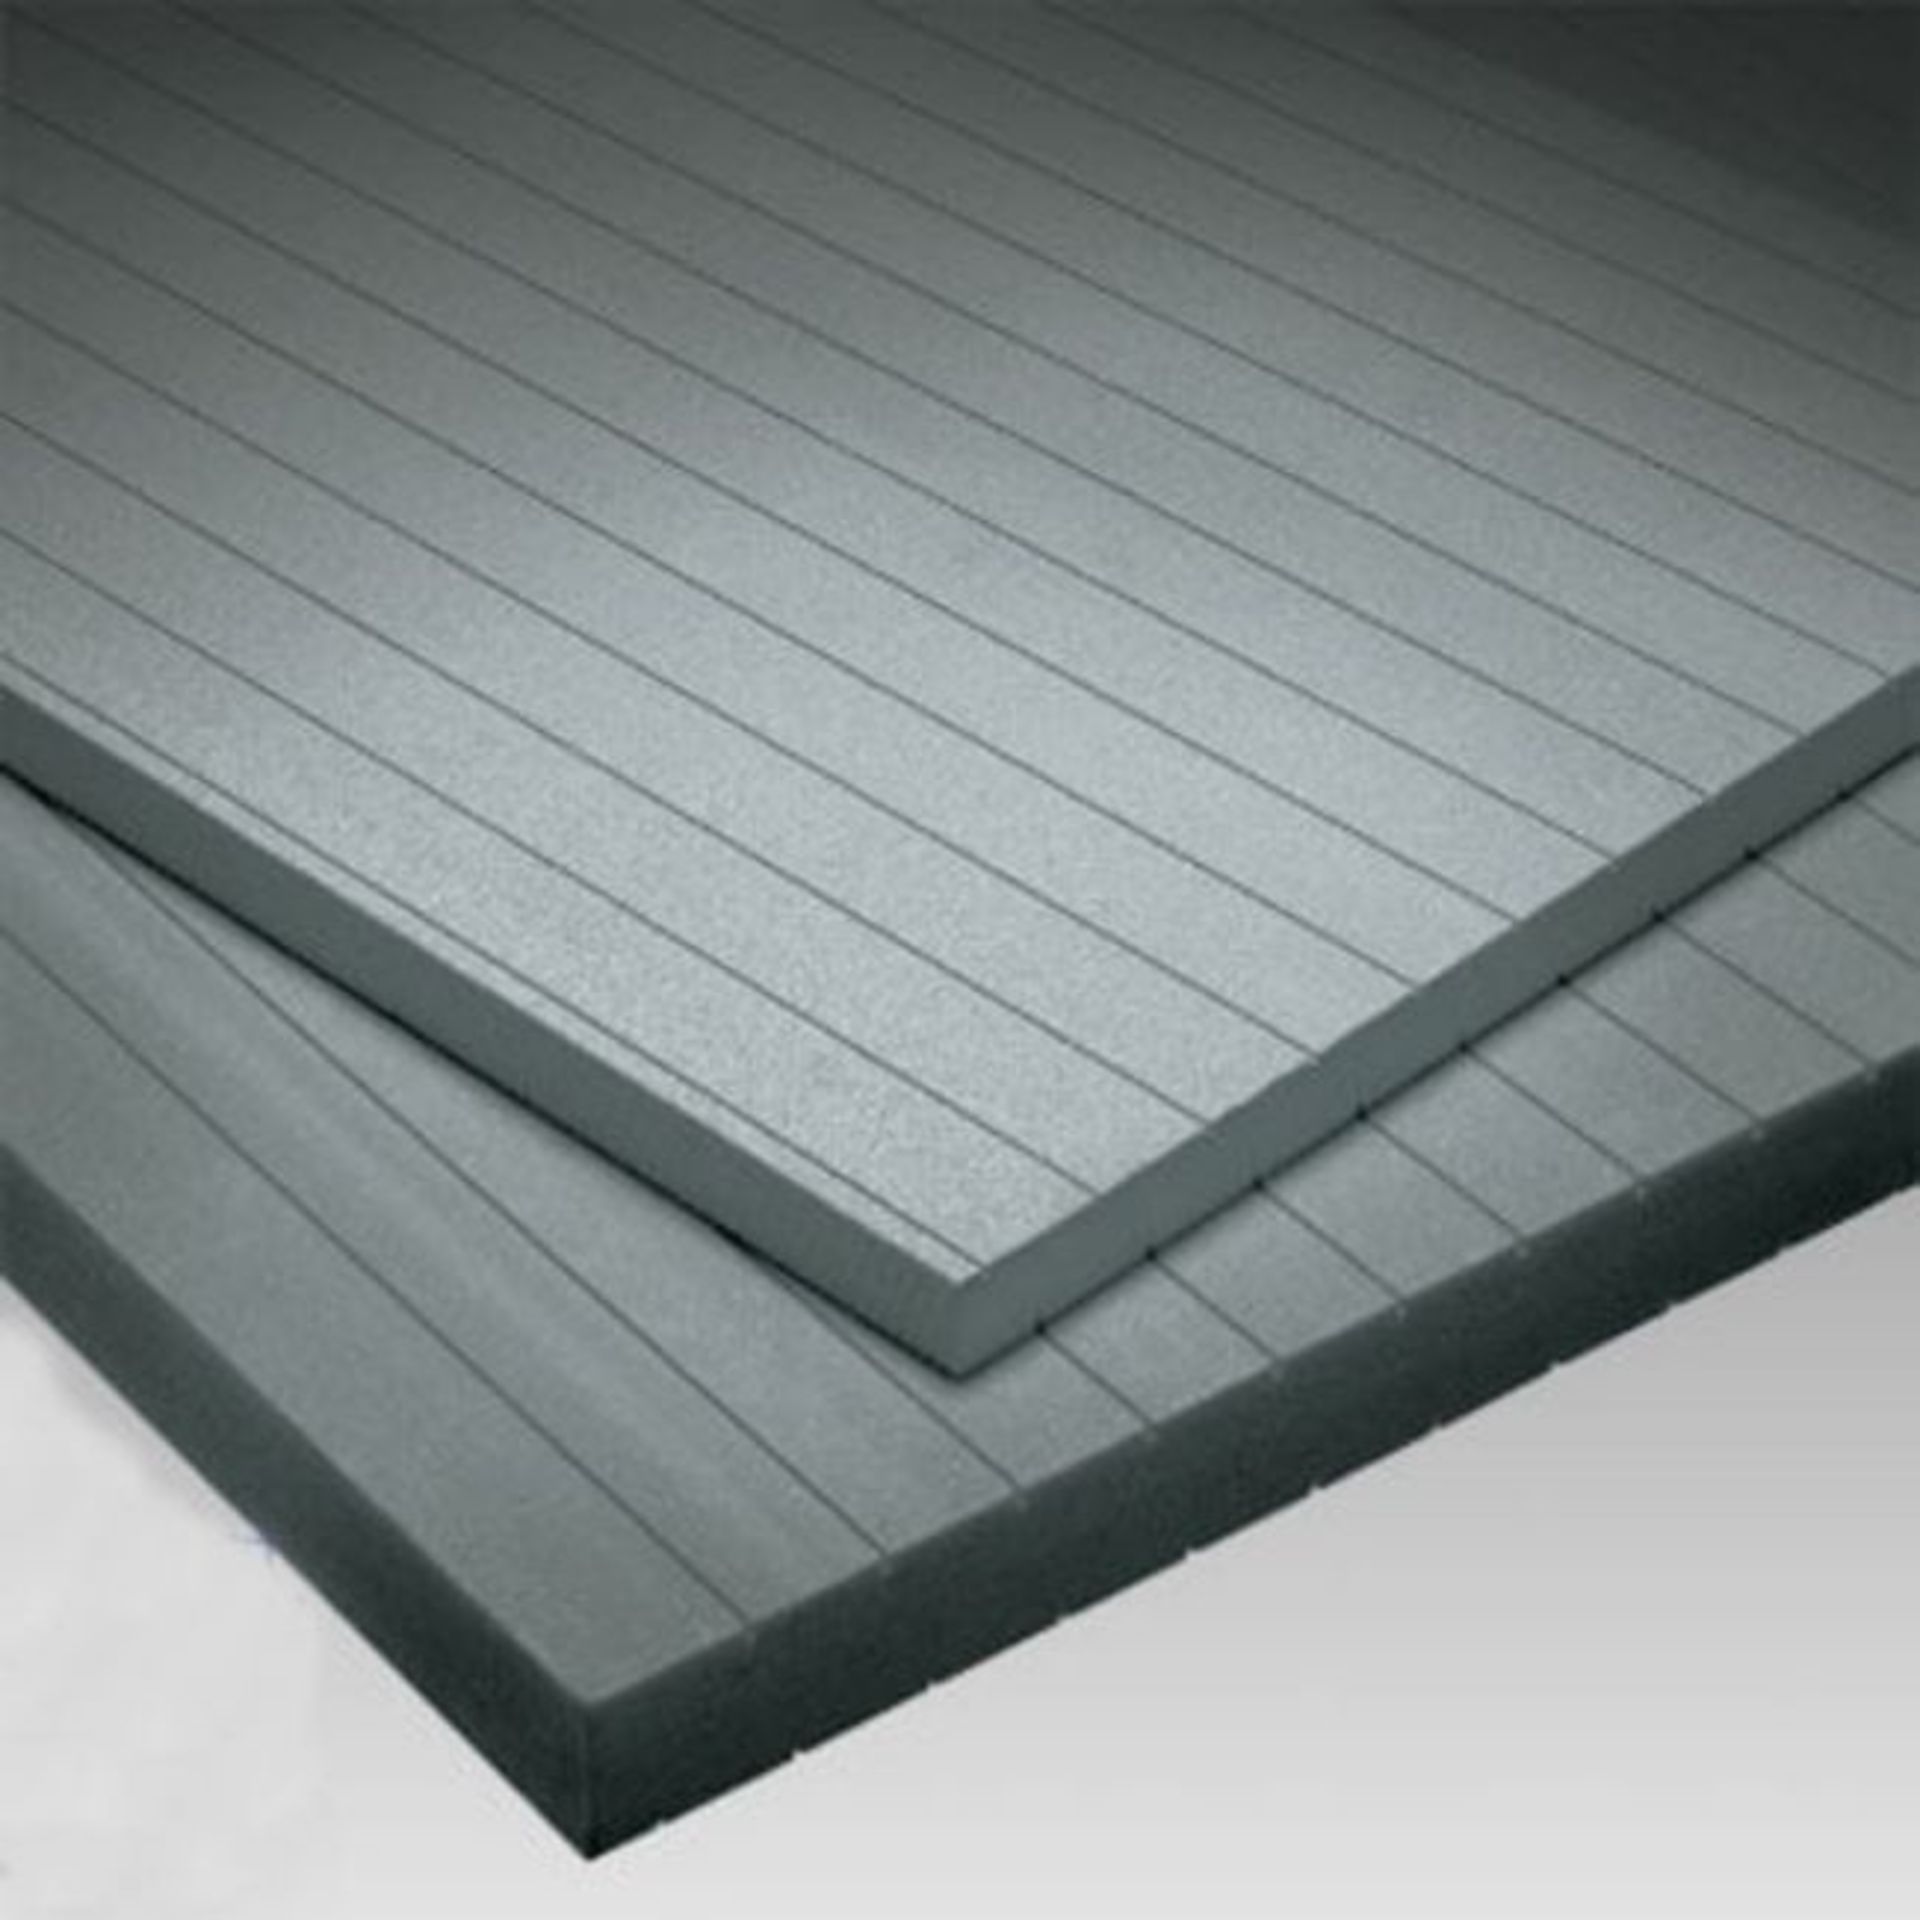 11 x Xenergy RTM Plus Extruded Polystyrene Thermal Insulation Boards - Offcuts Including 6 x 250cm - Image 4 of 4